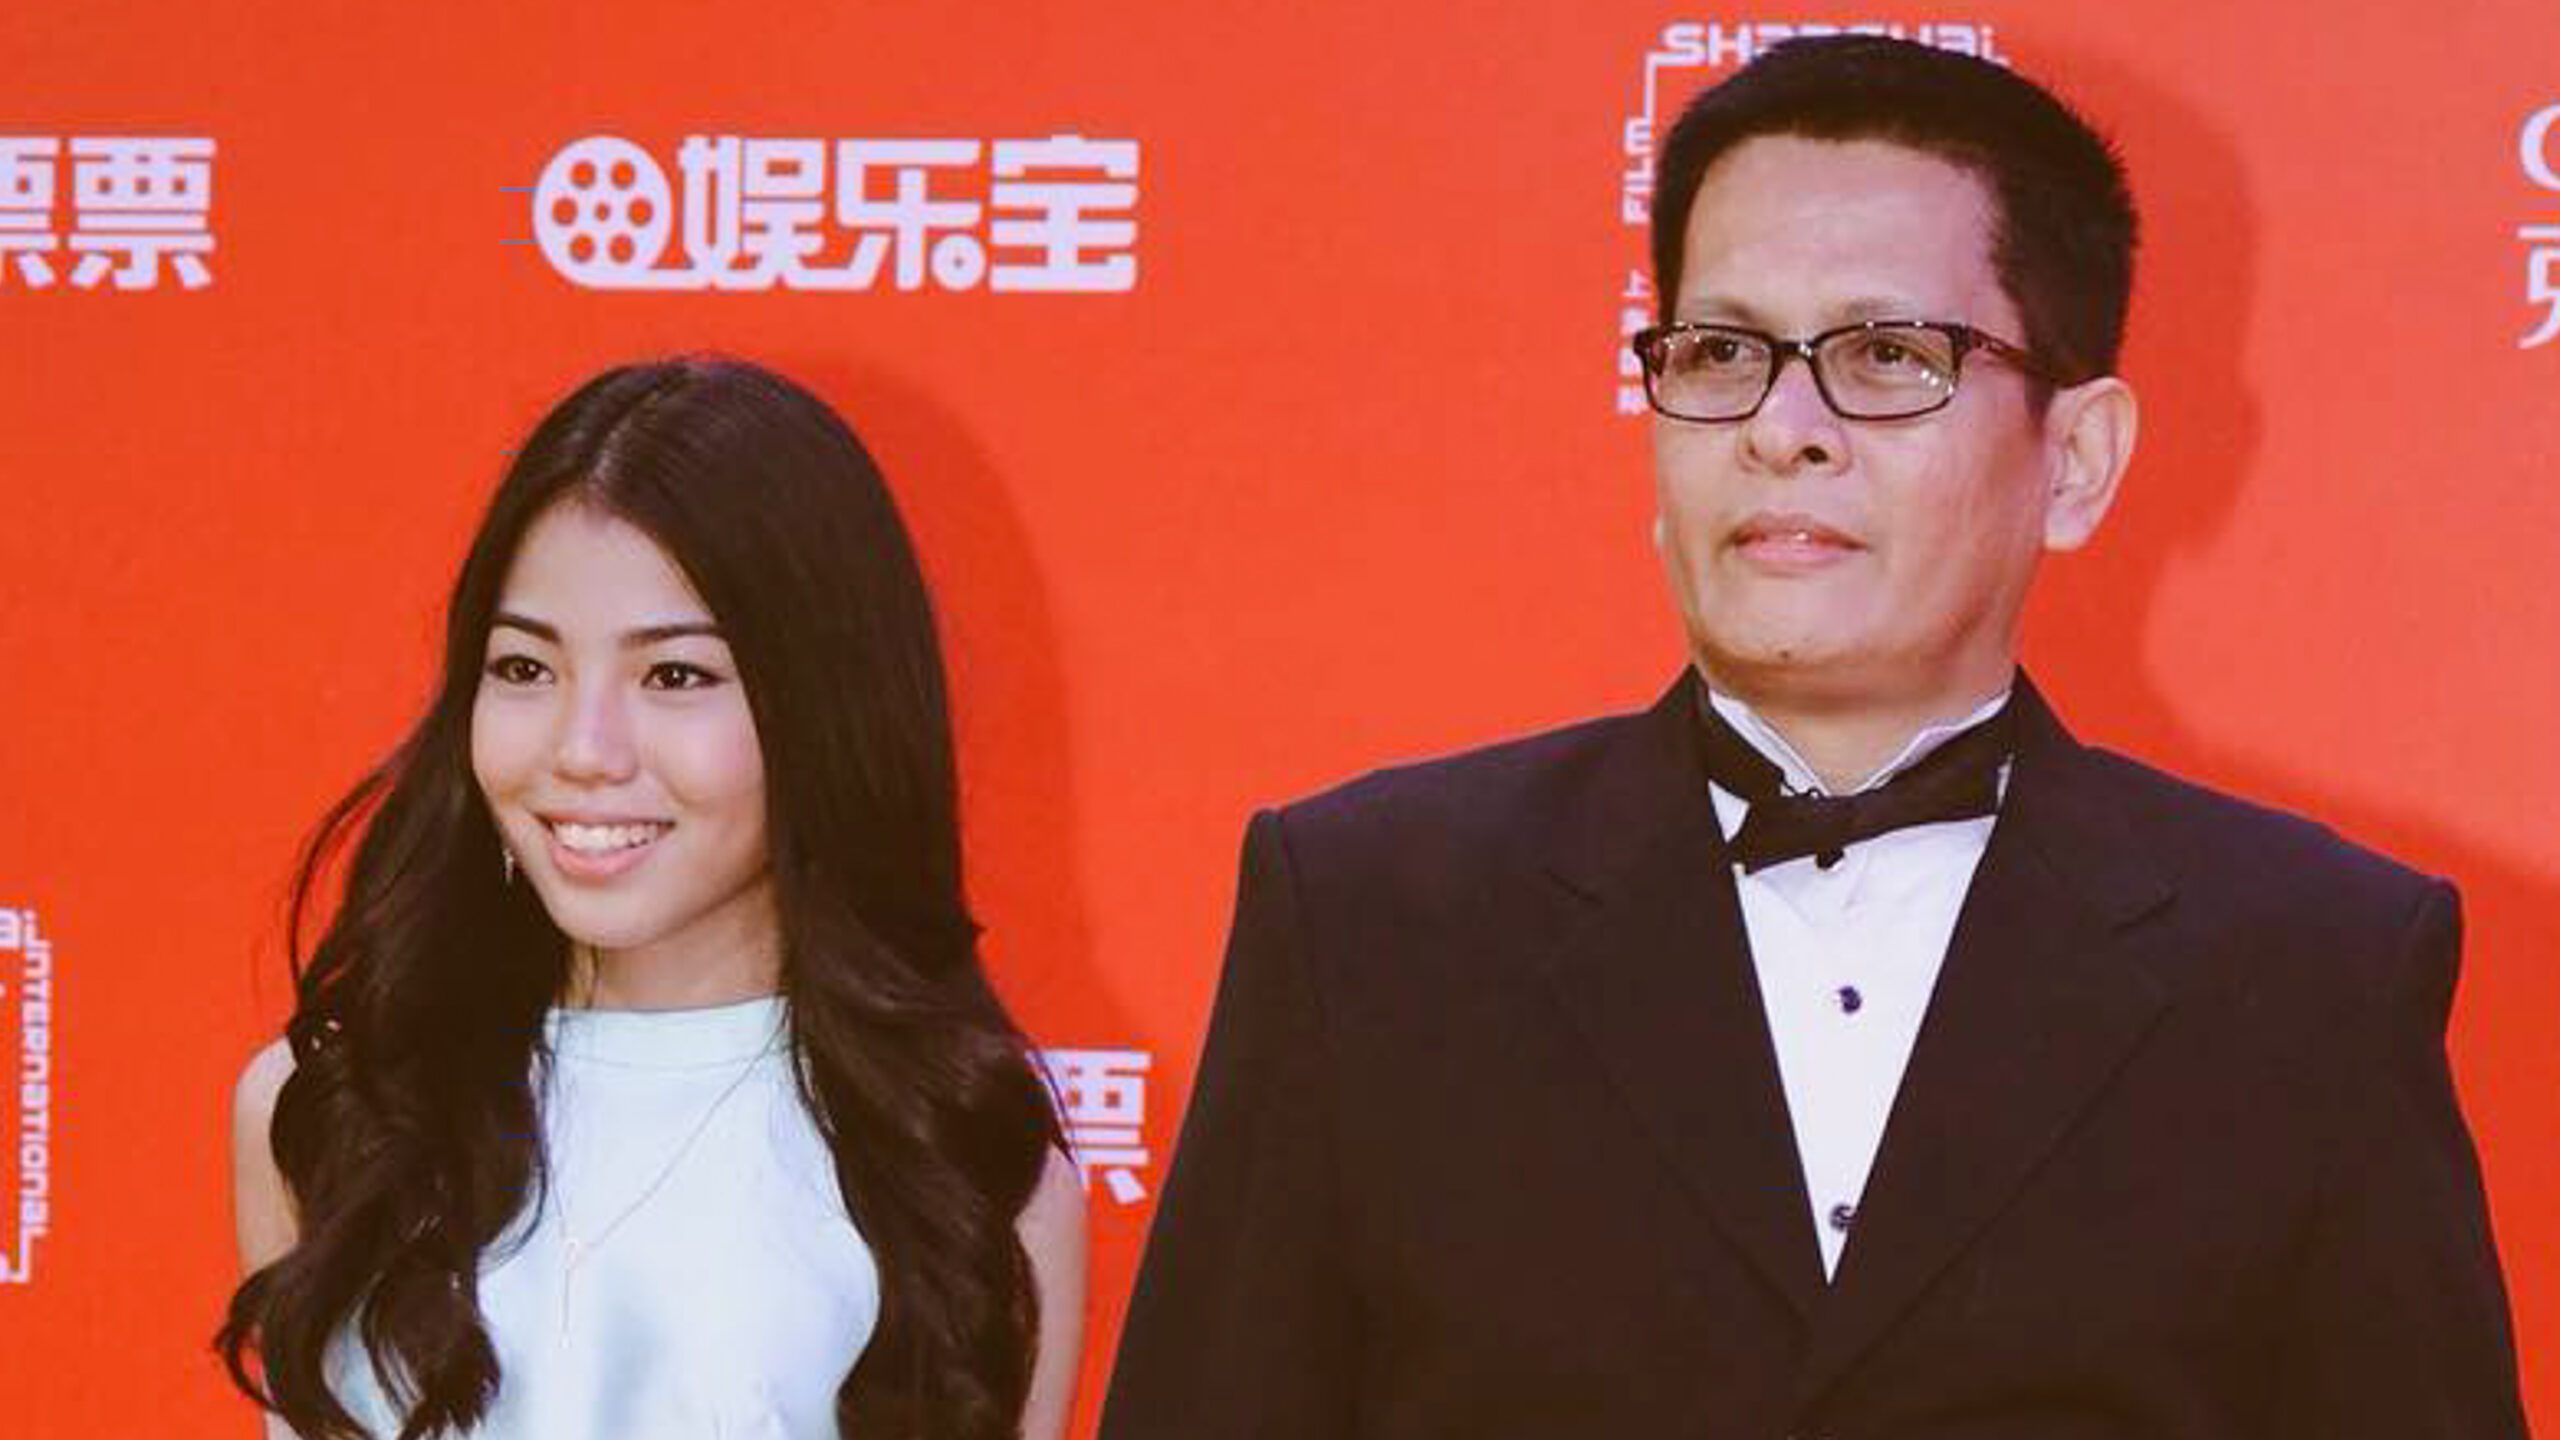 PH teen actress Therese Malvar wins Best Actress at Moscow film festival